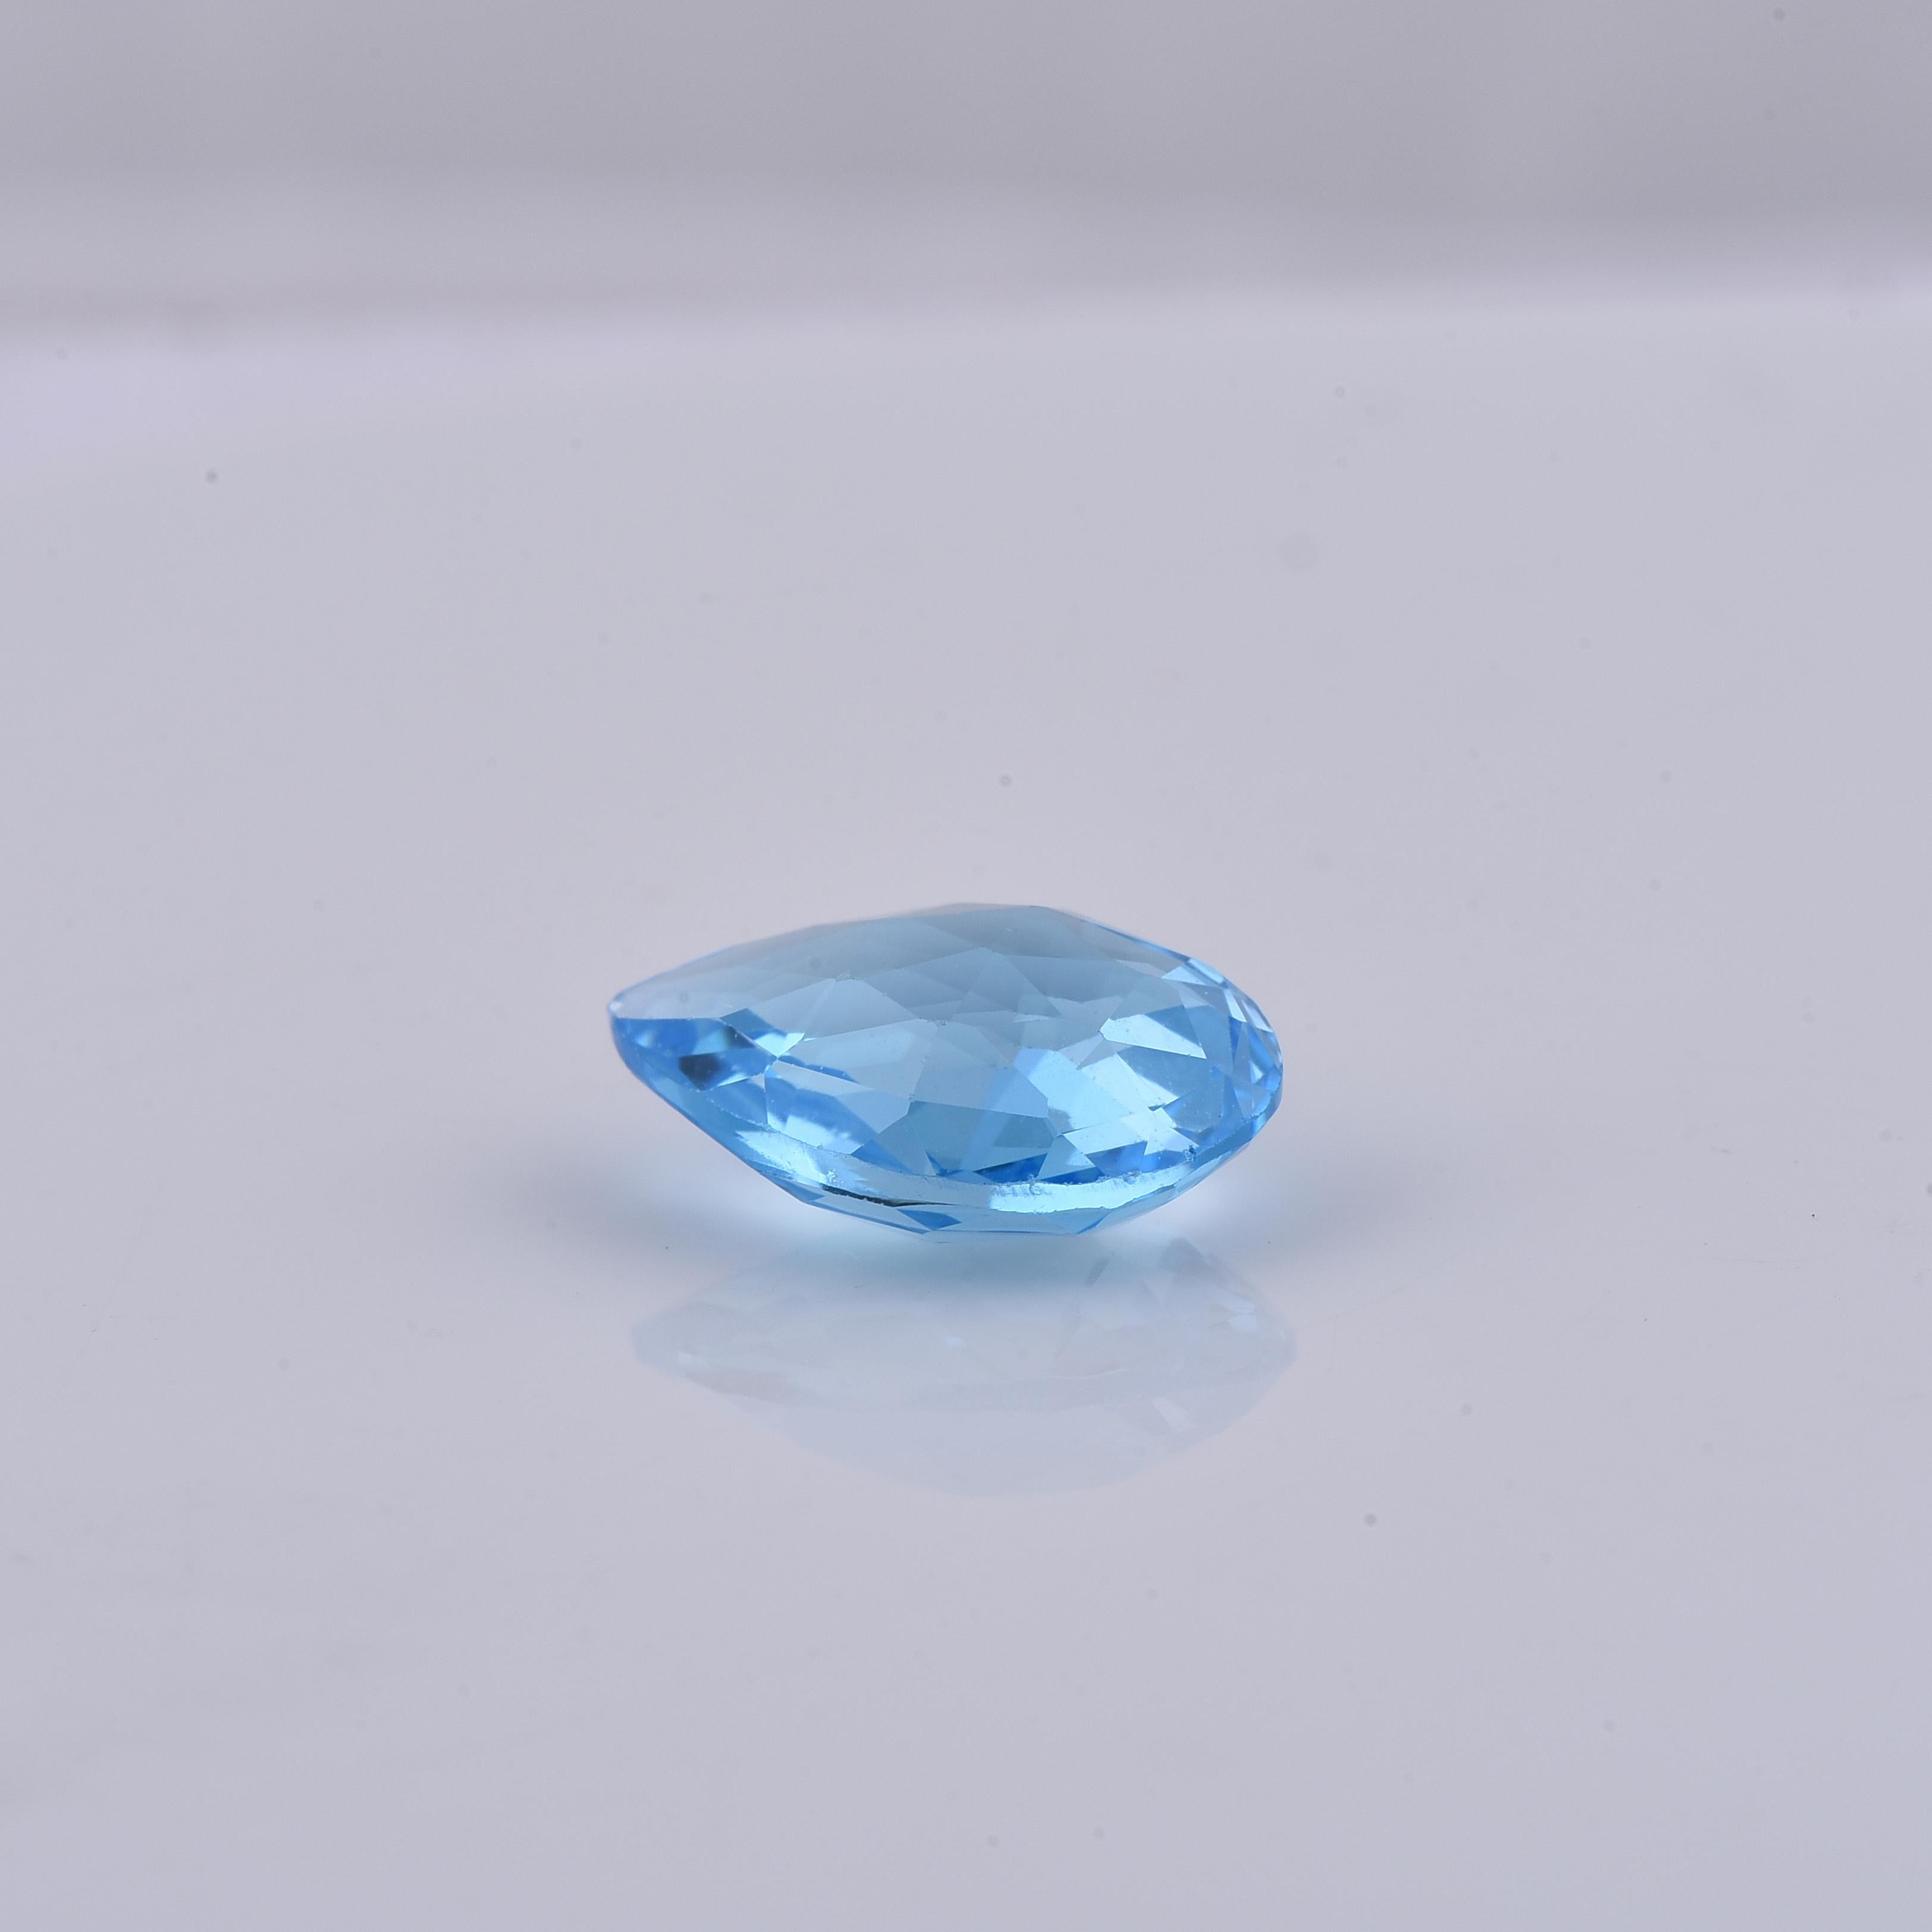 Stone Information: Natural Swiss Blue Topaz
Shape/Cut: Pear Shape
Color: Blue
Dimensions (mm): 14.93 x 8.14 x 5.50
Weight: 5.15ct